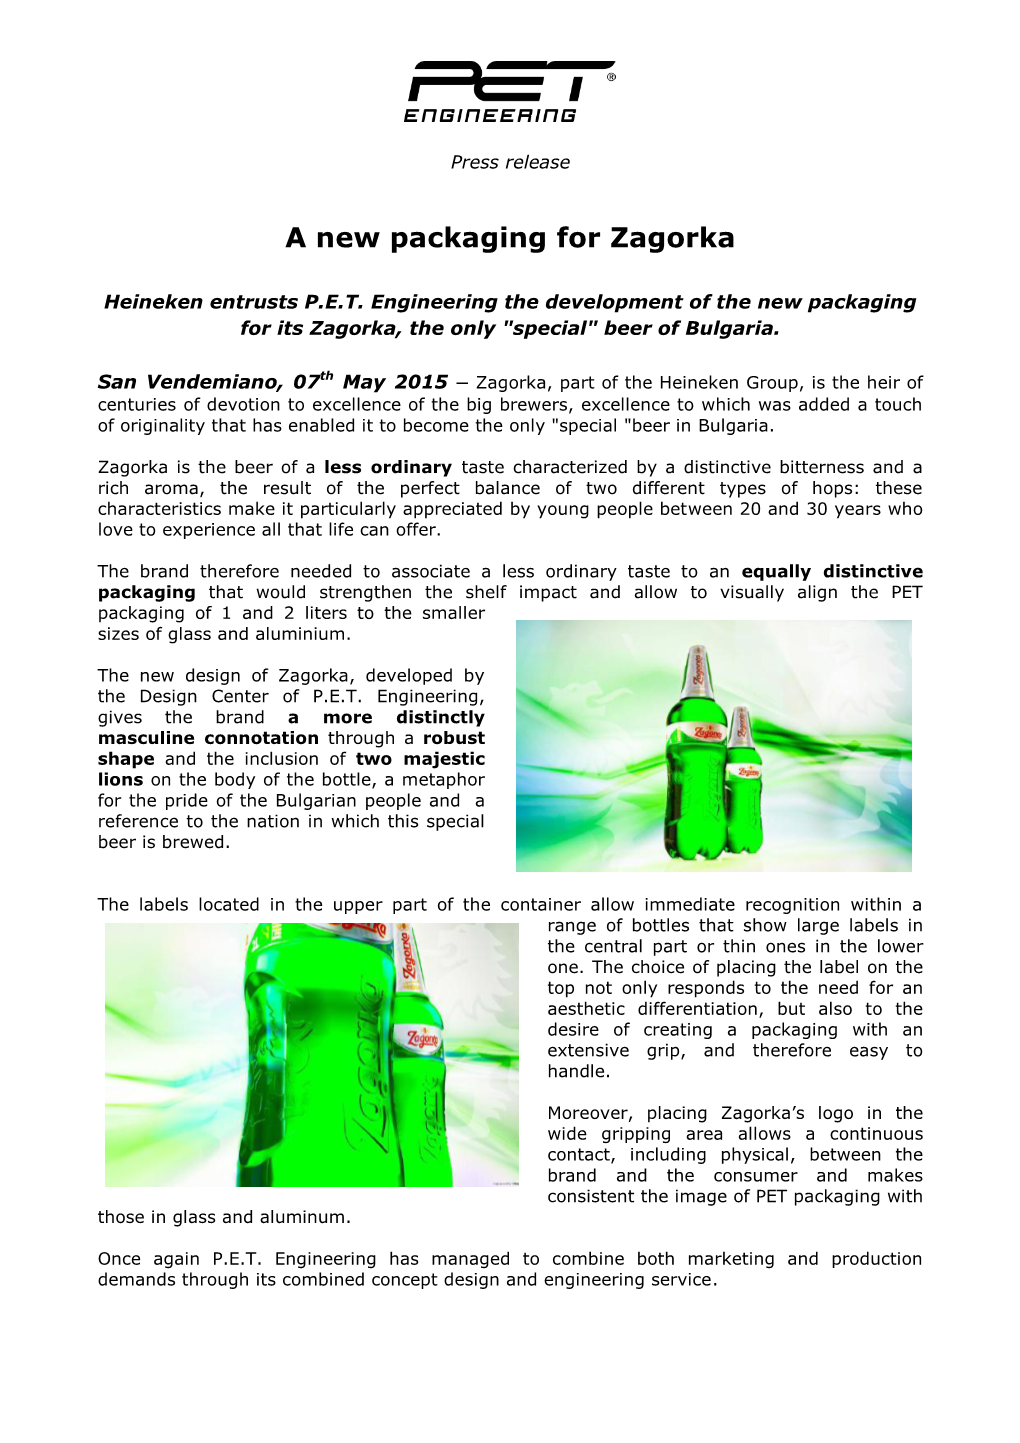 A New Packaging for Zagorka